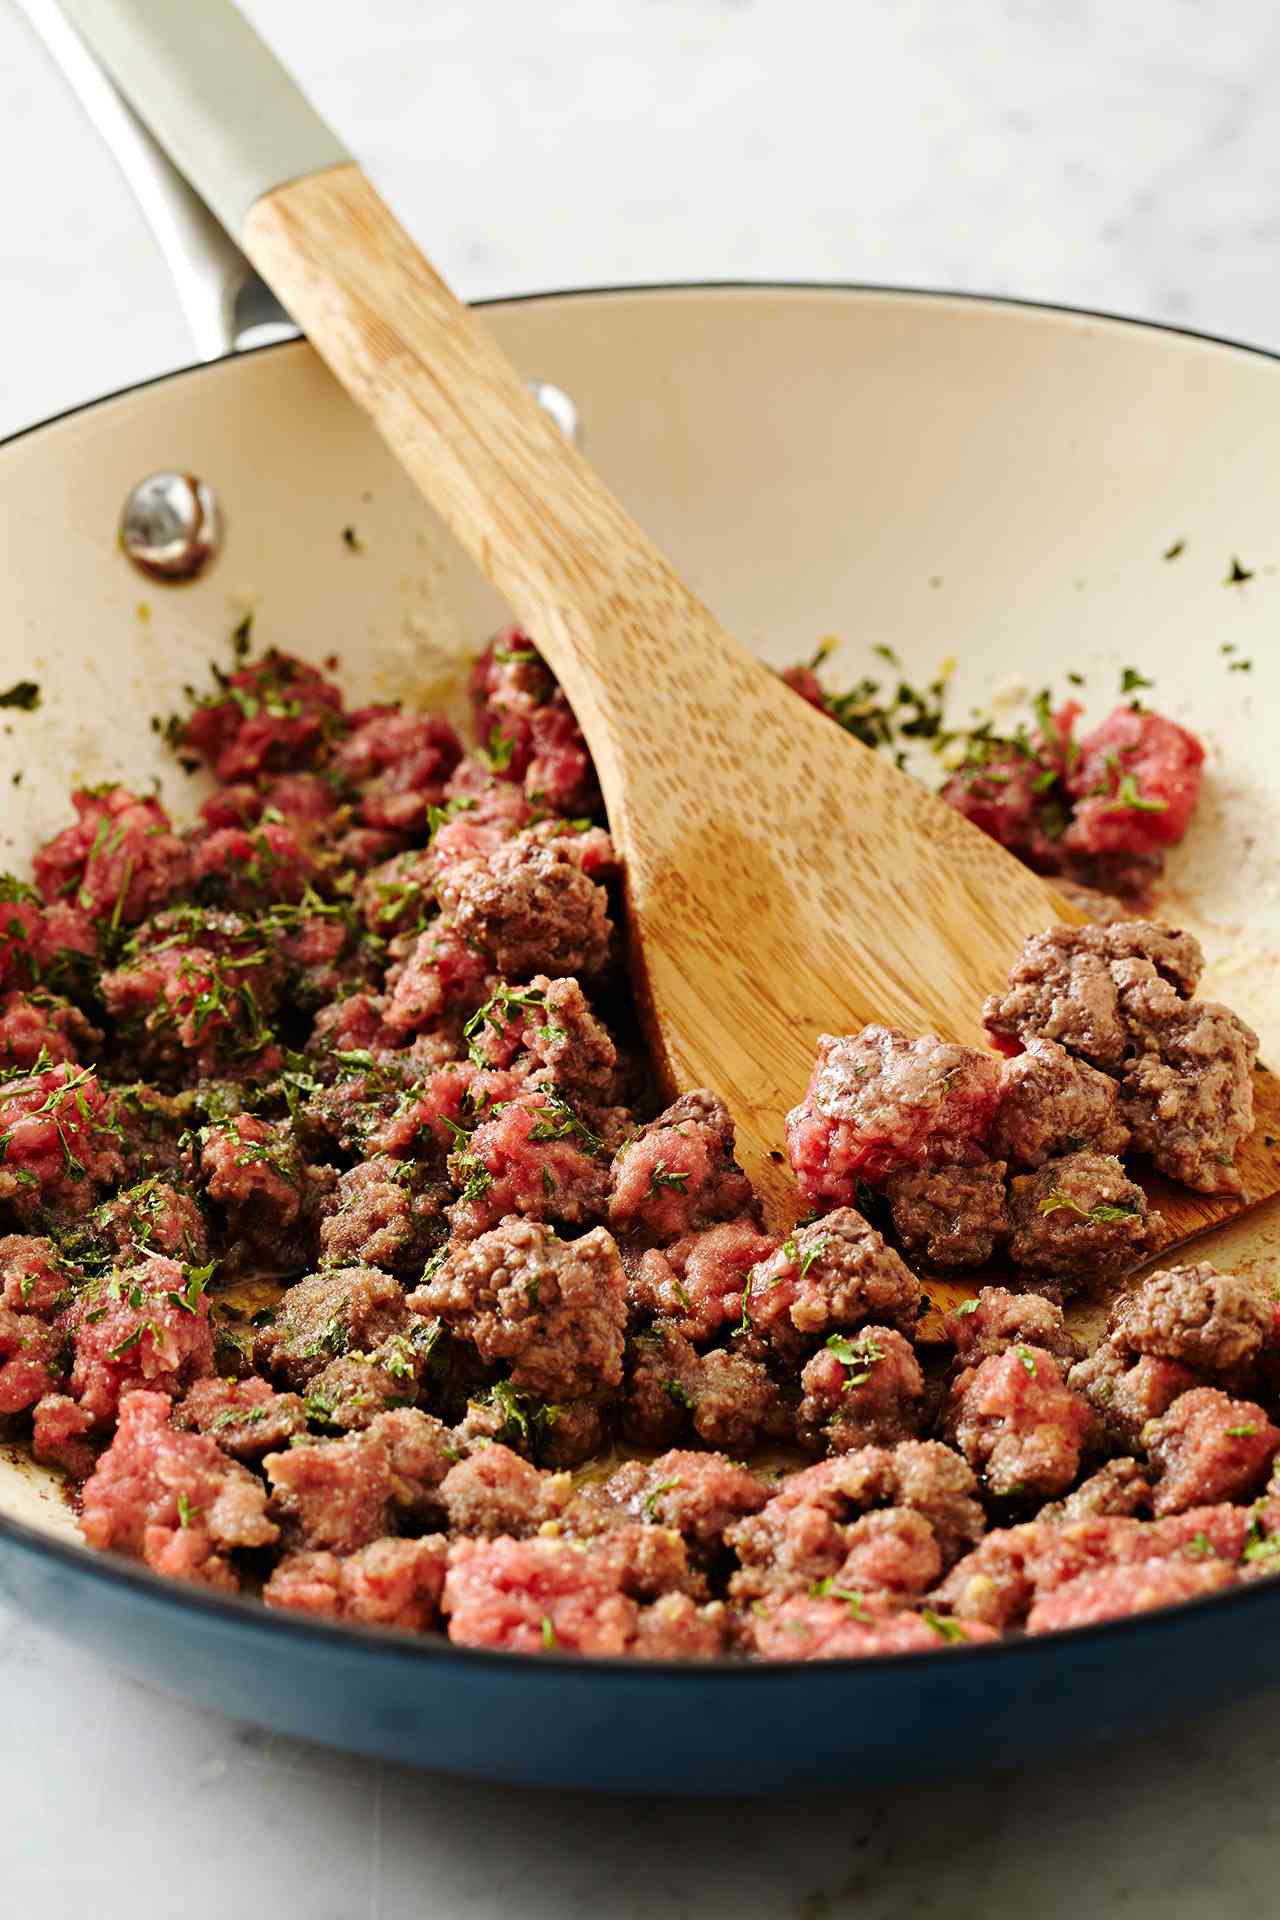 How to Cook Ground Beef - Doing it Right Makes All the Difference!